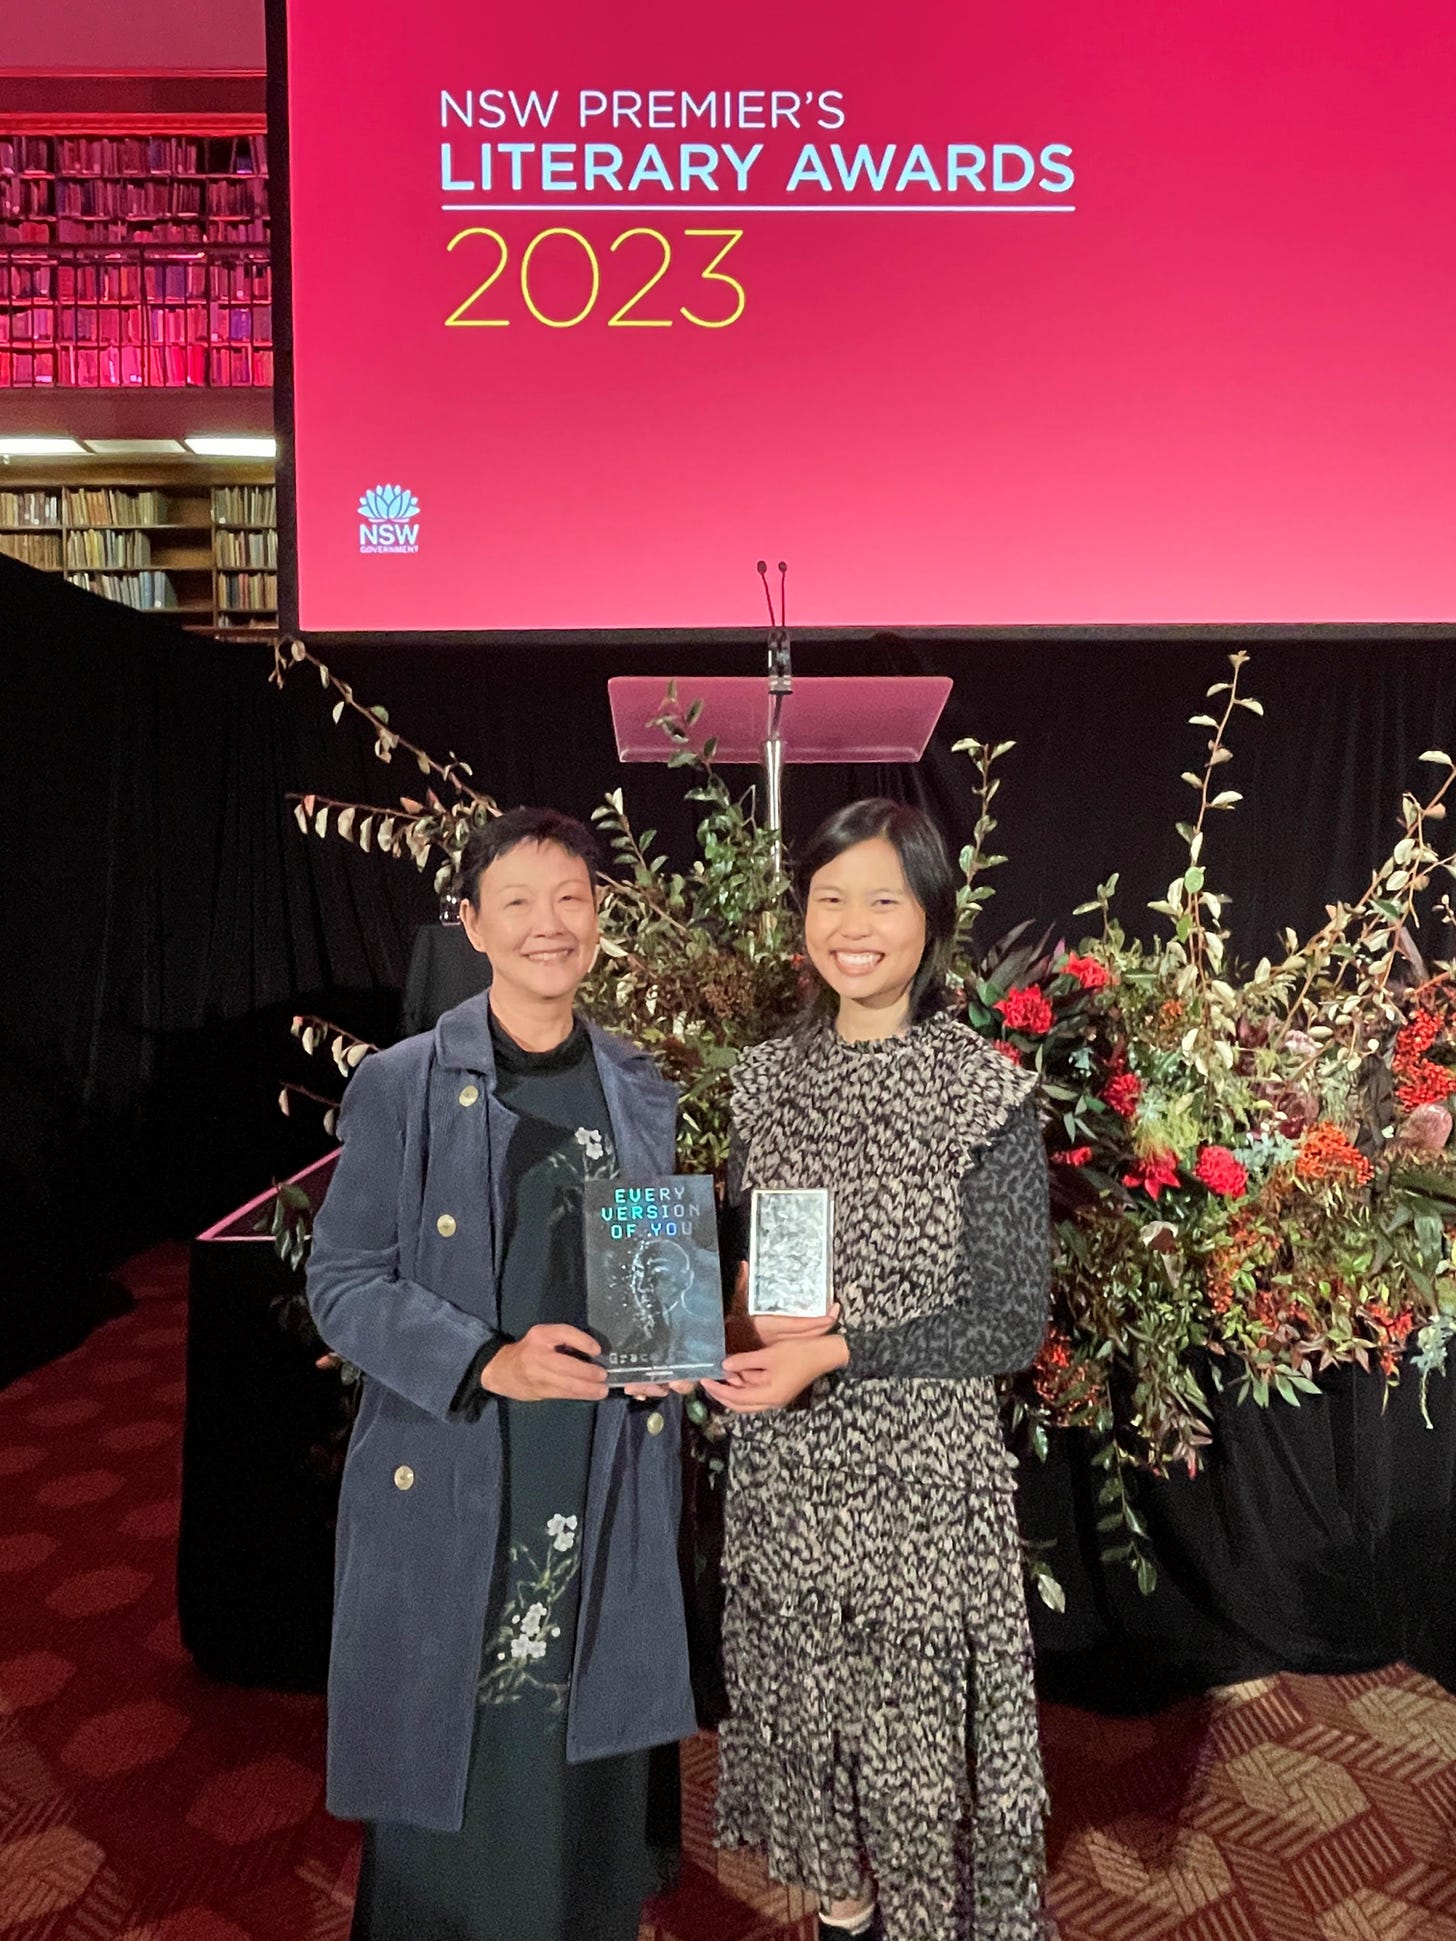 A photo of Grace Chan and Beth Yahp at the NSW Premier's Literary Awards, holding Grace's book and a trophy